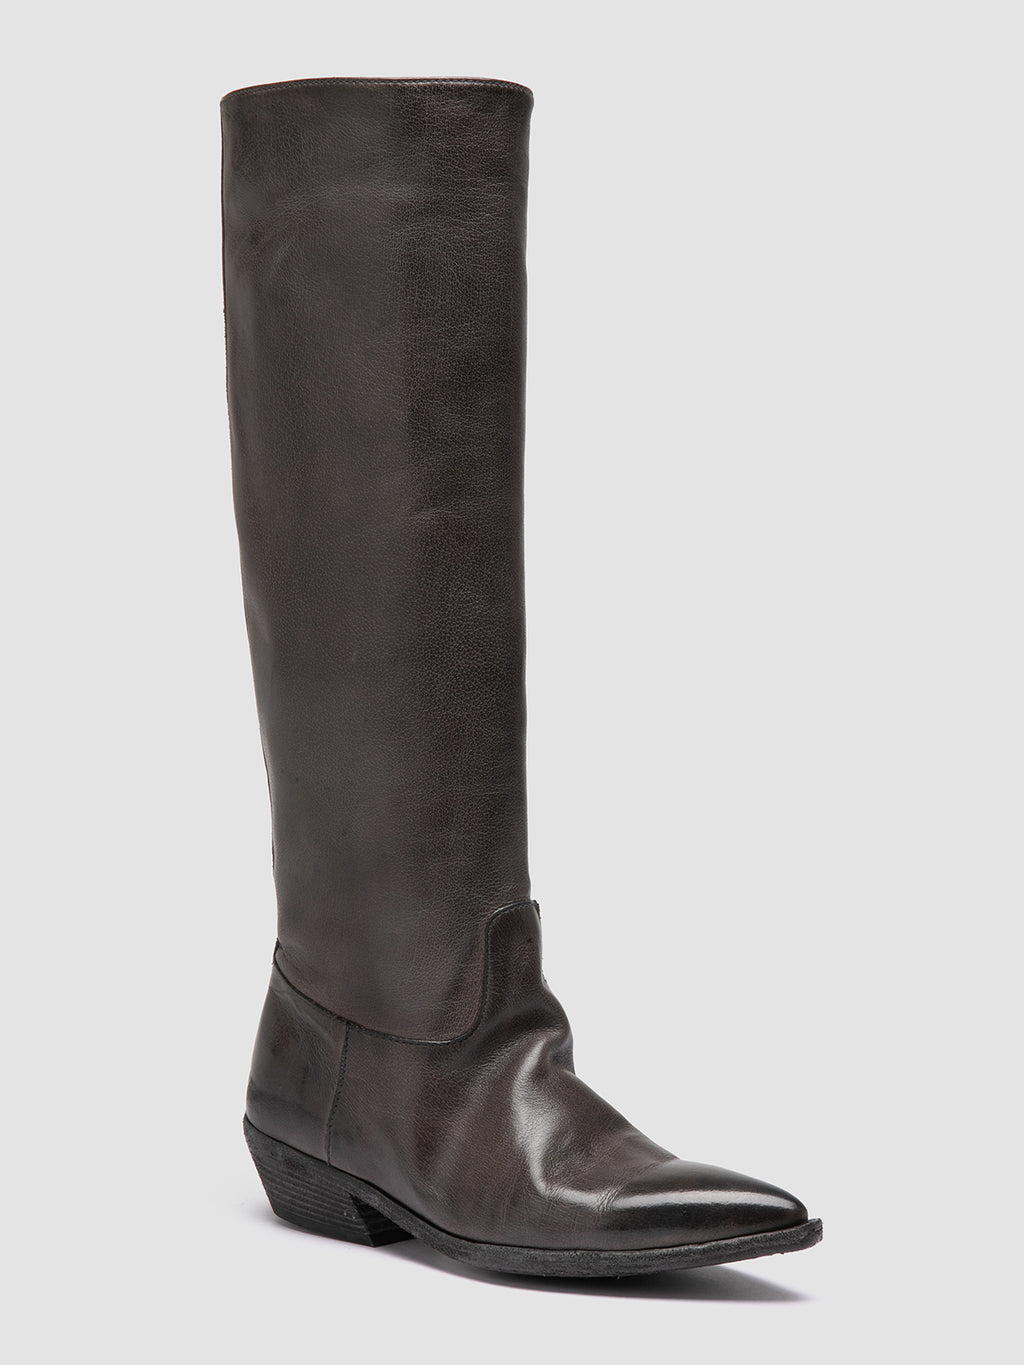 NOELIE DD 104 - Grey Leather Pull On Boots